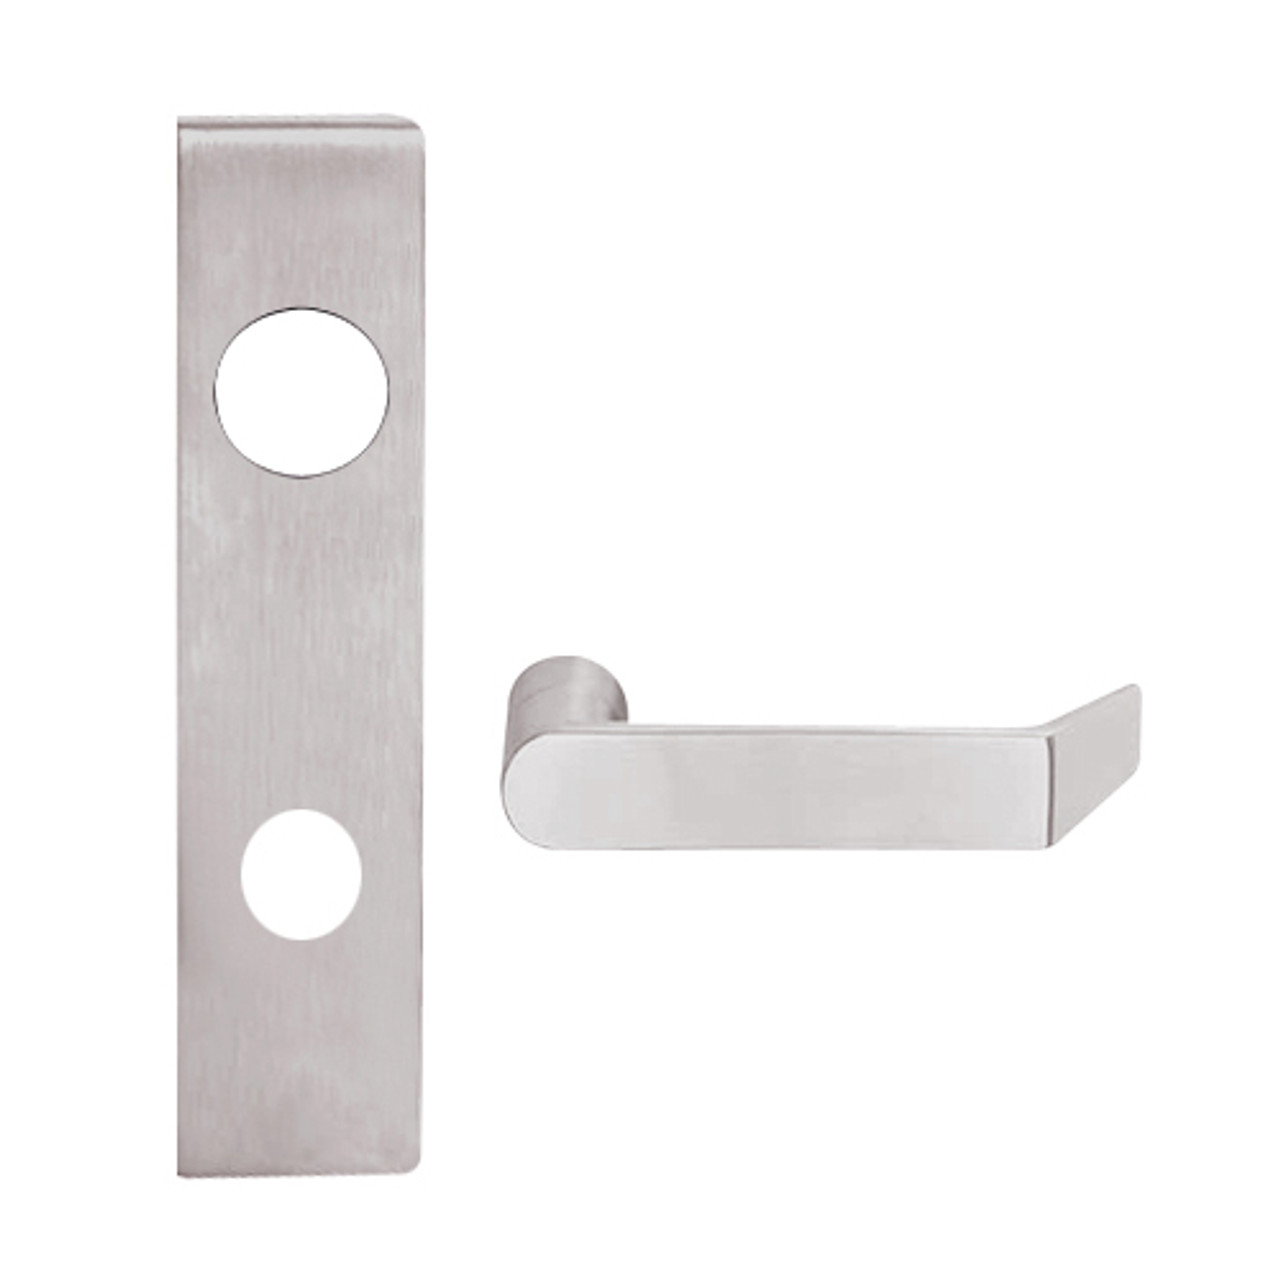 L9456BD-06L-630 Schlage L Series Corridor with Deadbolt Commercial Mortise Lock with 06 Cast Lever Design Prepped for SFIC in Satin Stainless Steel